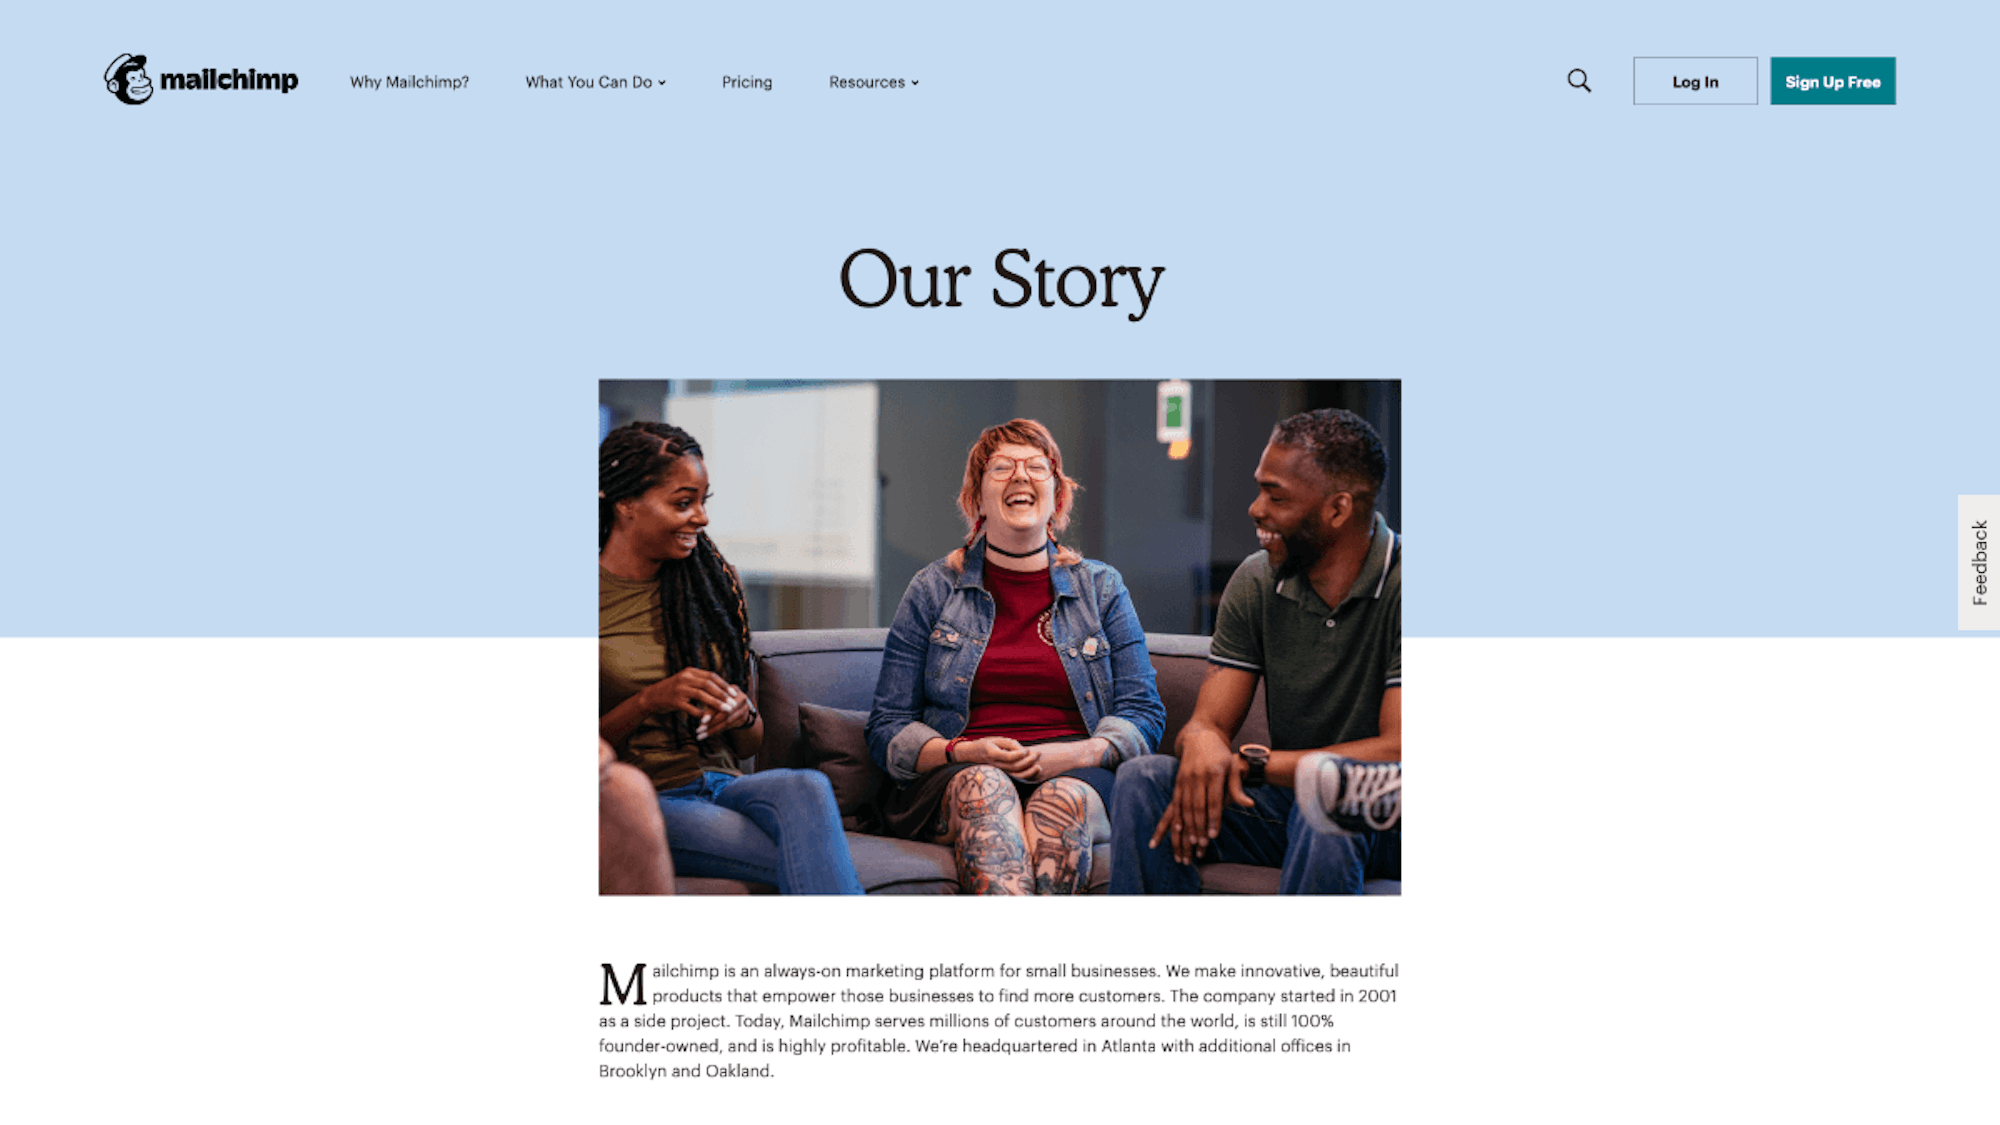 MailChimp's About Us page